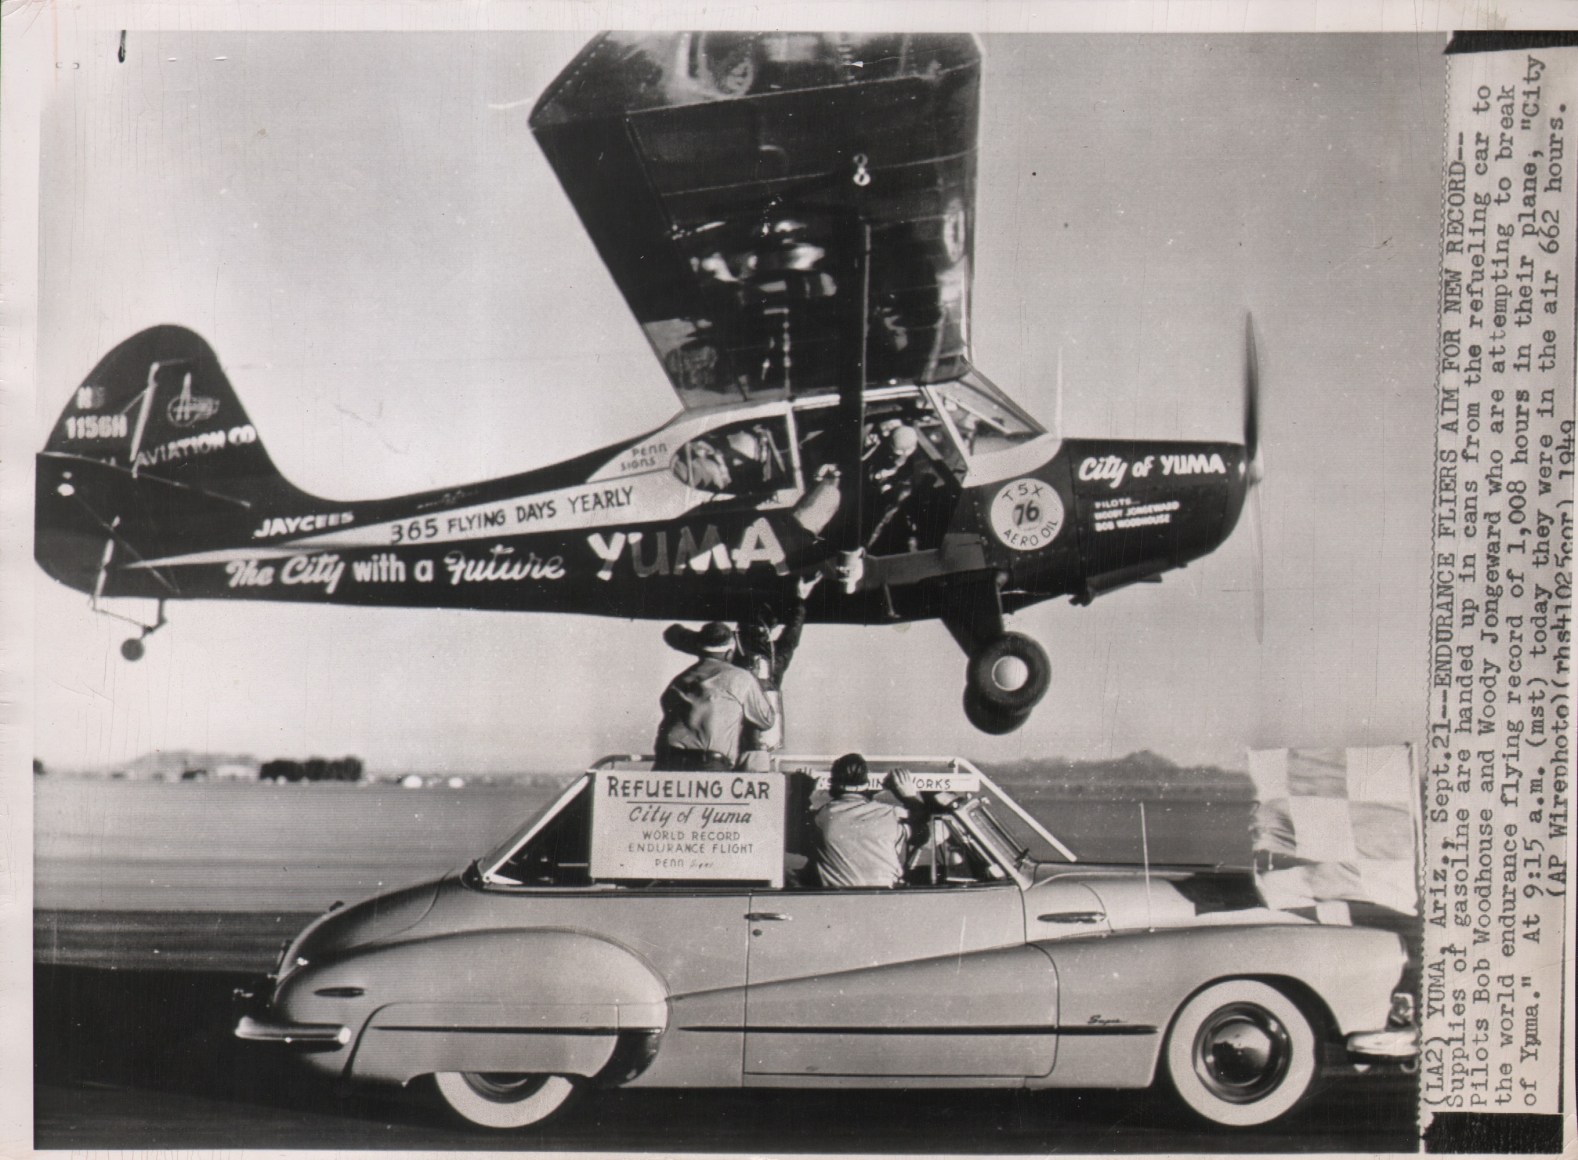 44. Associated Press, Endurance Fliers Aim for New Record, ​September 21, 1949. &quot;Refueling car&quot; drives beneath a small airplane marked &quot;City of Yuma&quot;